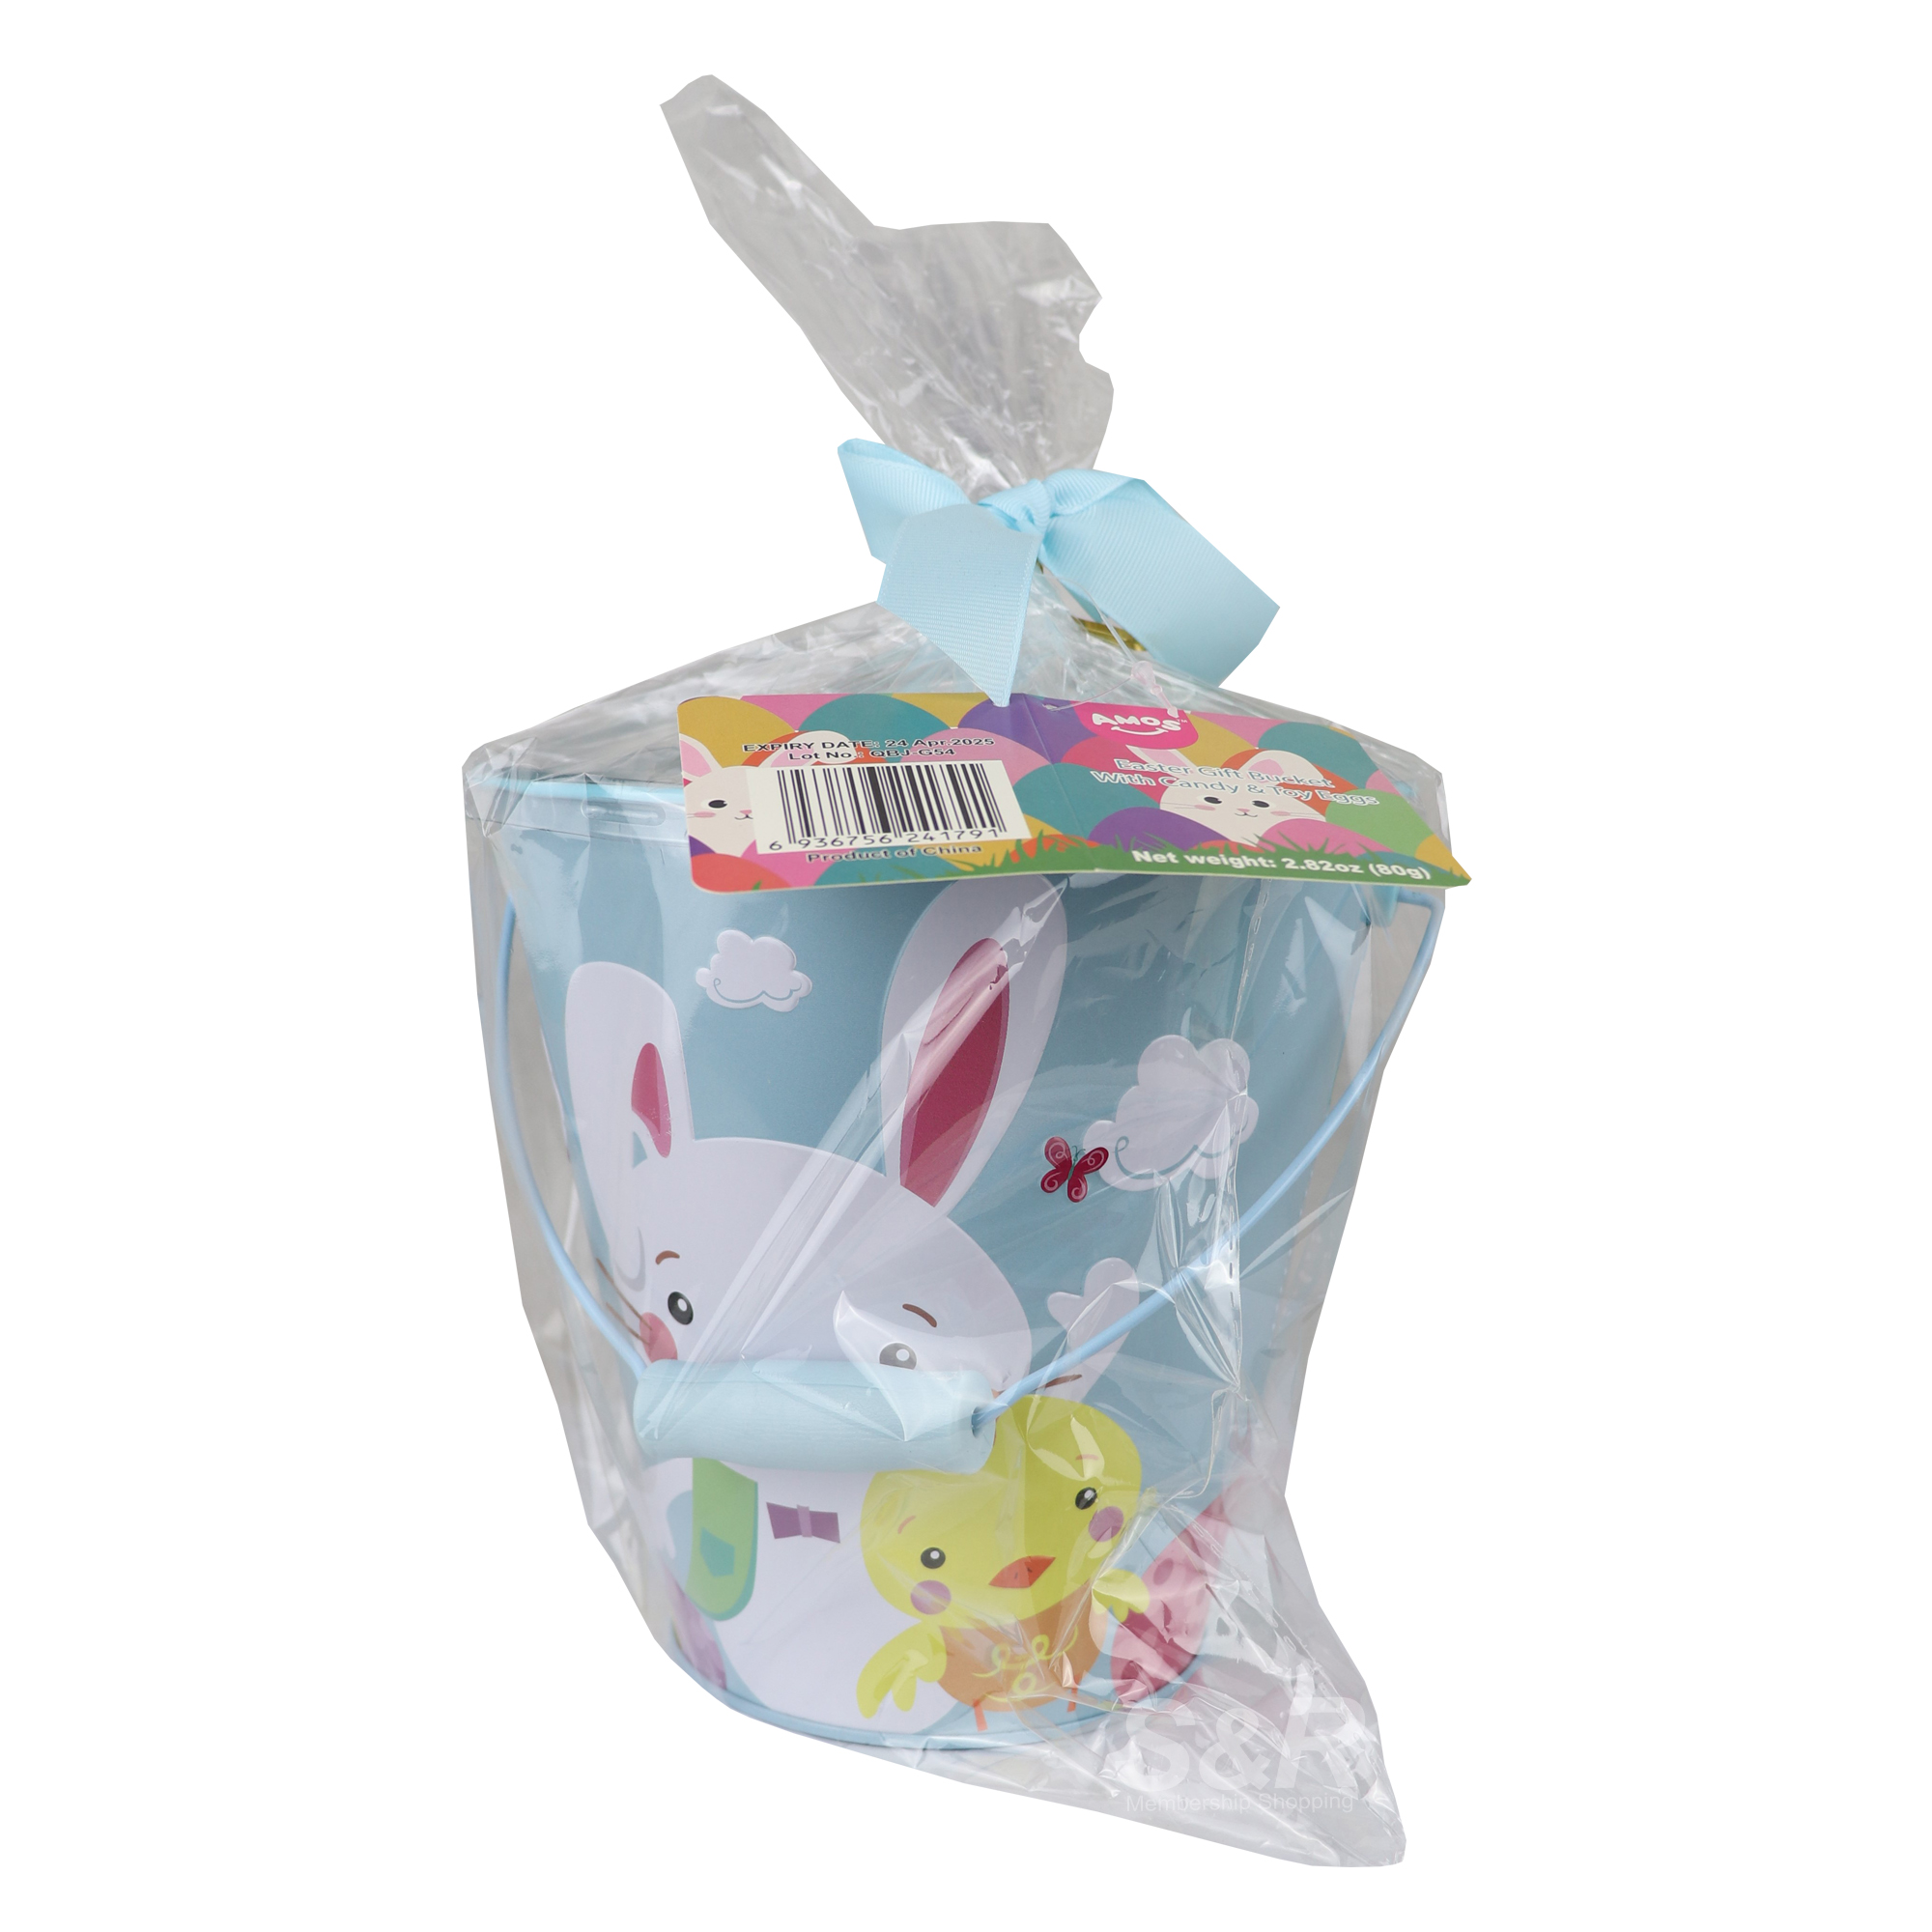 Amos Easter Gift Bucket With Jelly Bean Candy and Toy Eggs 80g